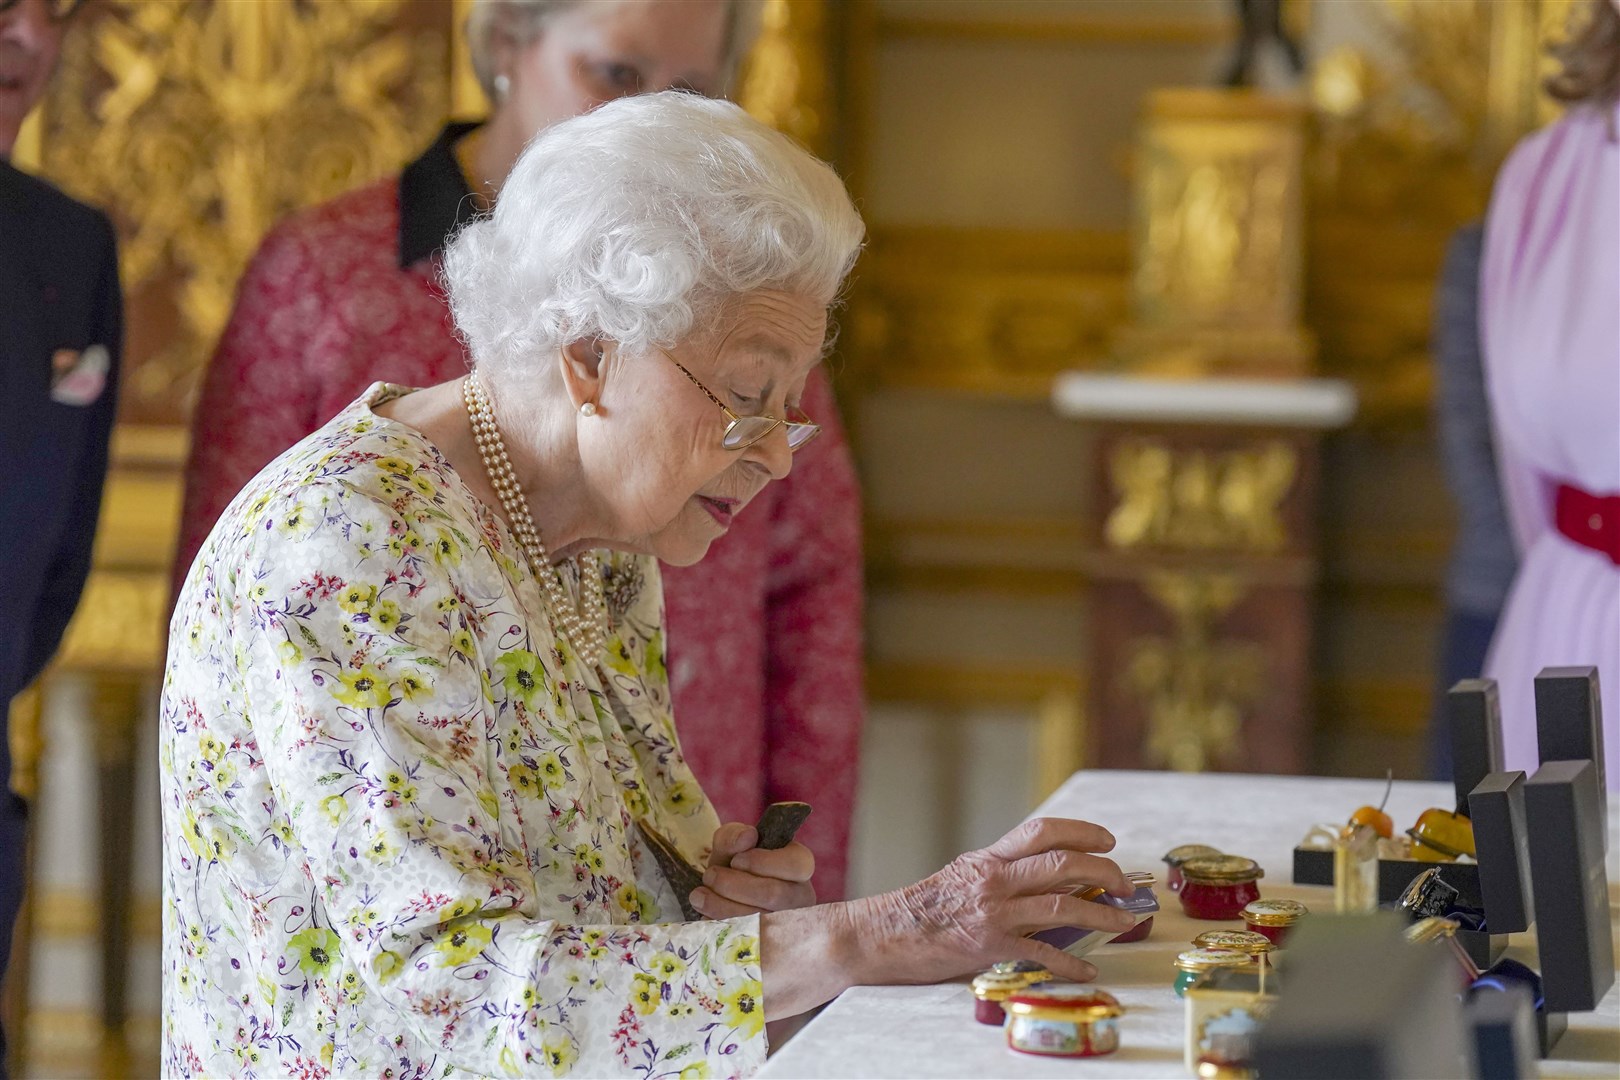 The monarch views a display of artefacts from British craftwork company, Halcyon Days, to commemorate the company’s 70th anniversary in the White Drawing Room at Windsor Castle, Berkshire (Steve Parsons/PA)